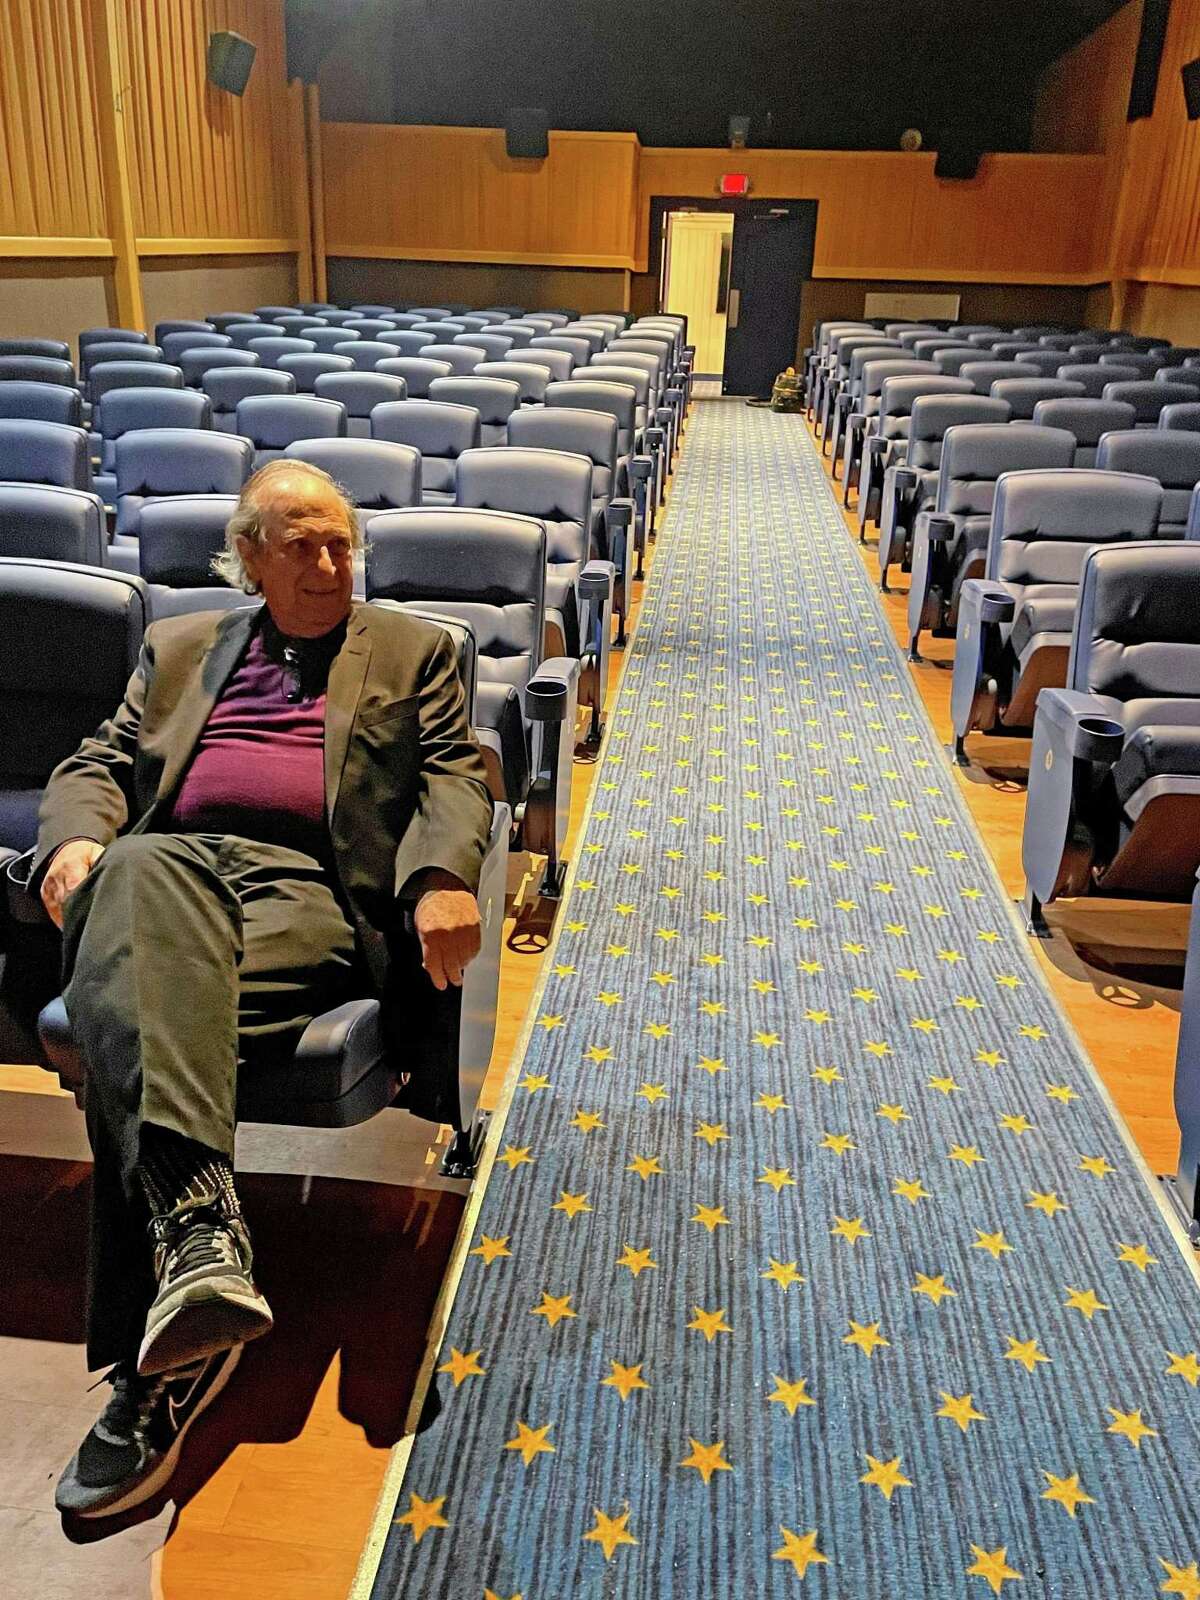 Harold Blank, new owner of Madison Cinemas in the refurbished theater.